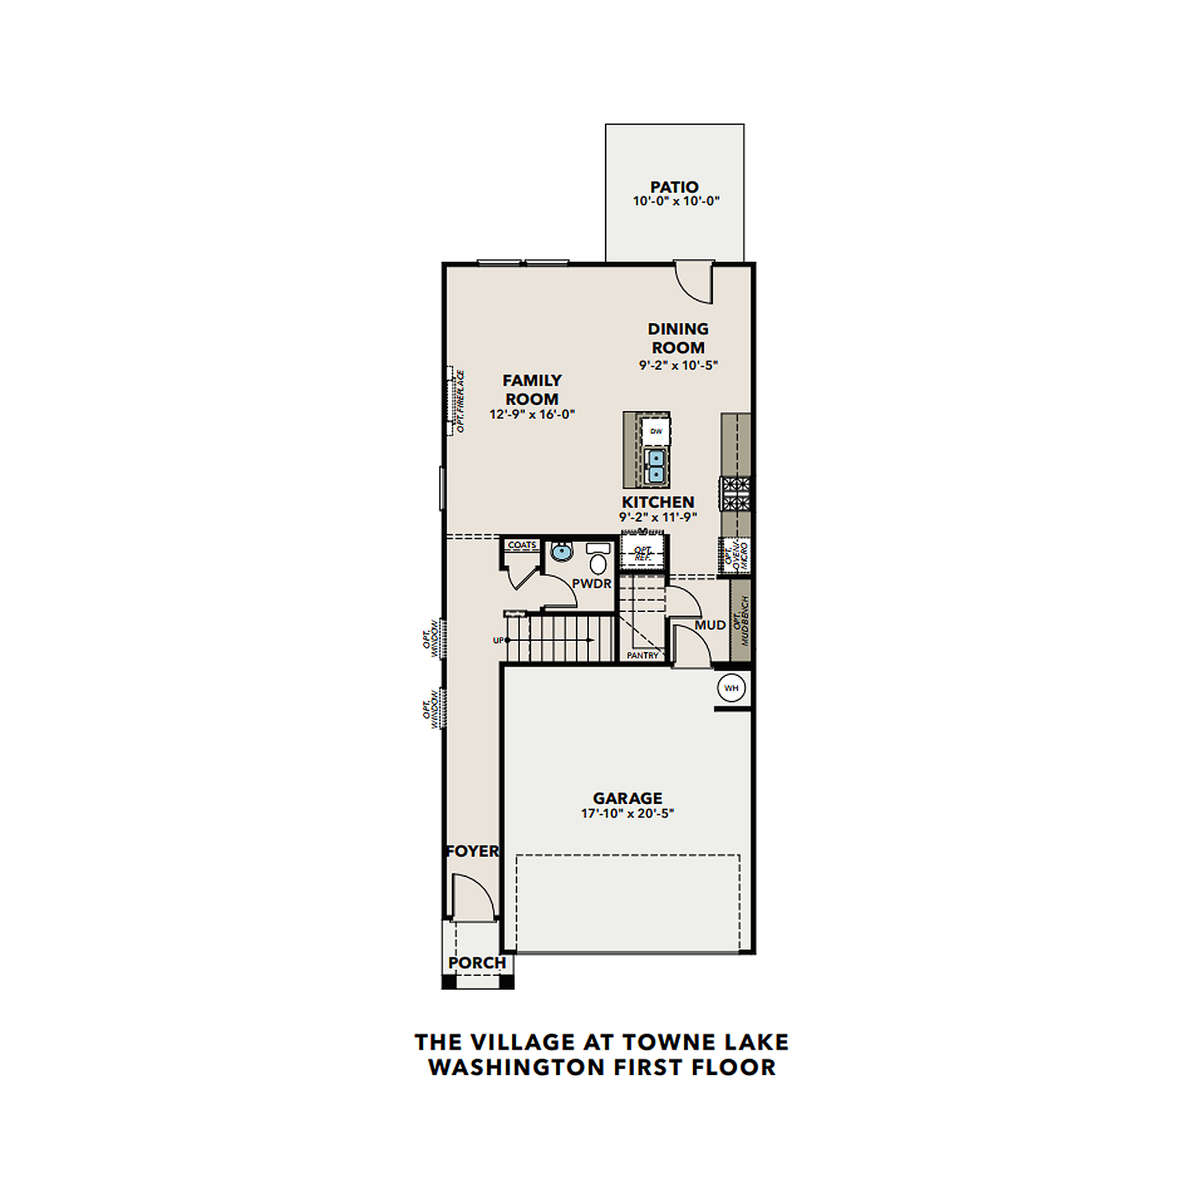 1 - The Washington D buildable floor plan layout in Davidson Homes' The Village at Towne Lake community.